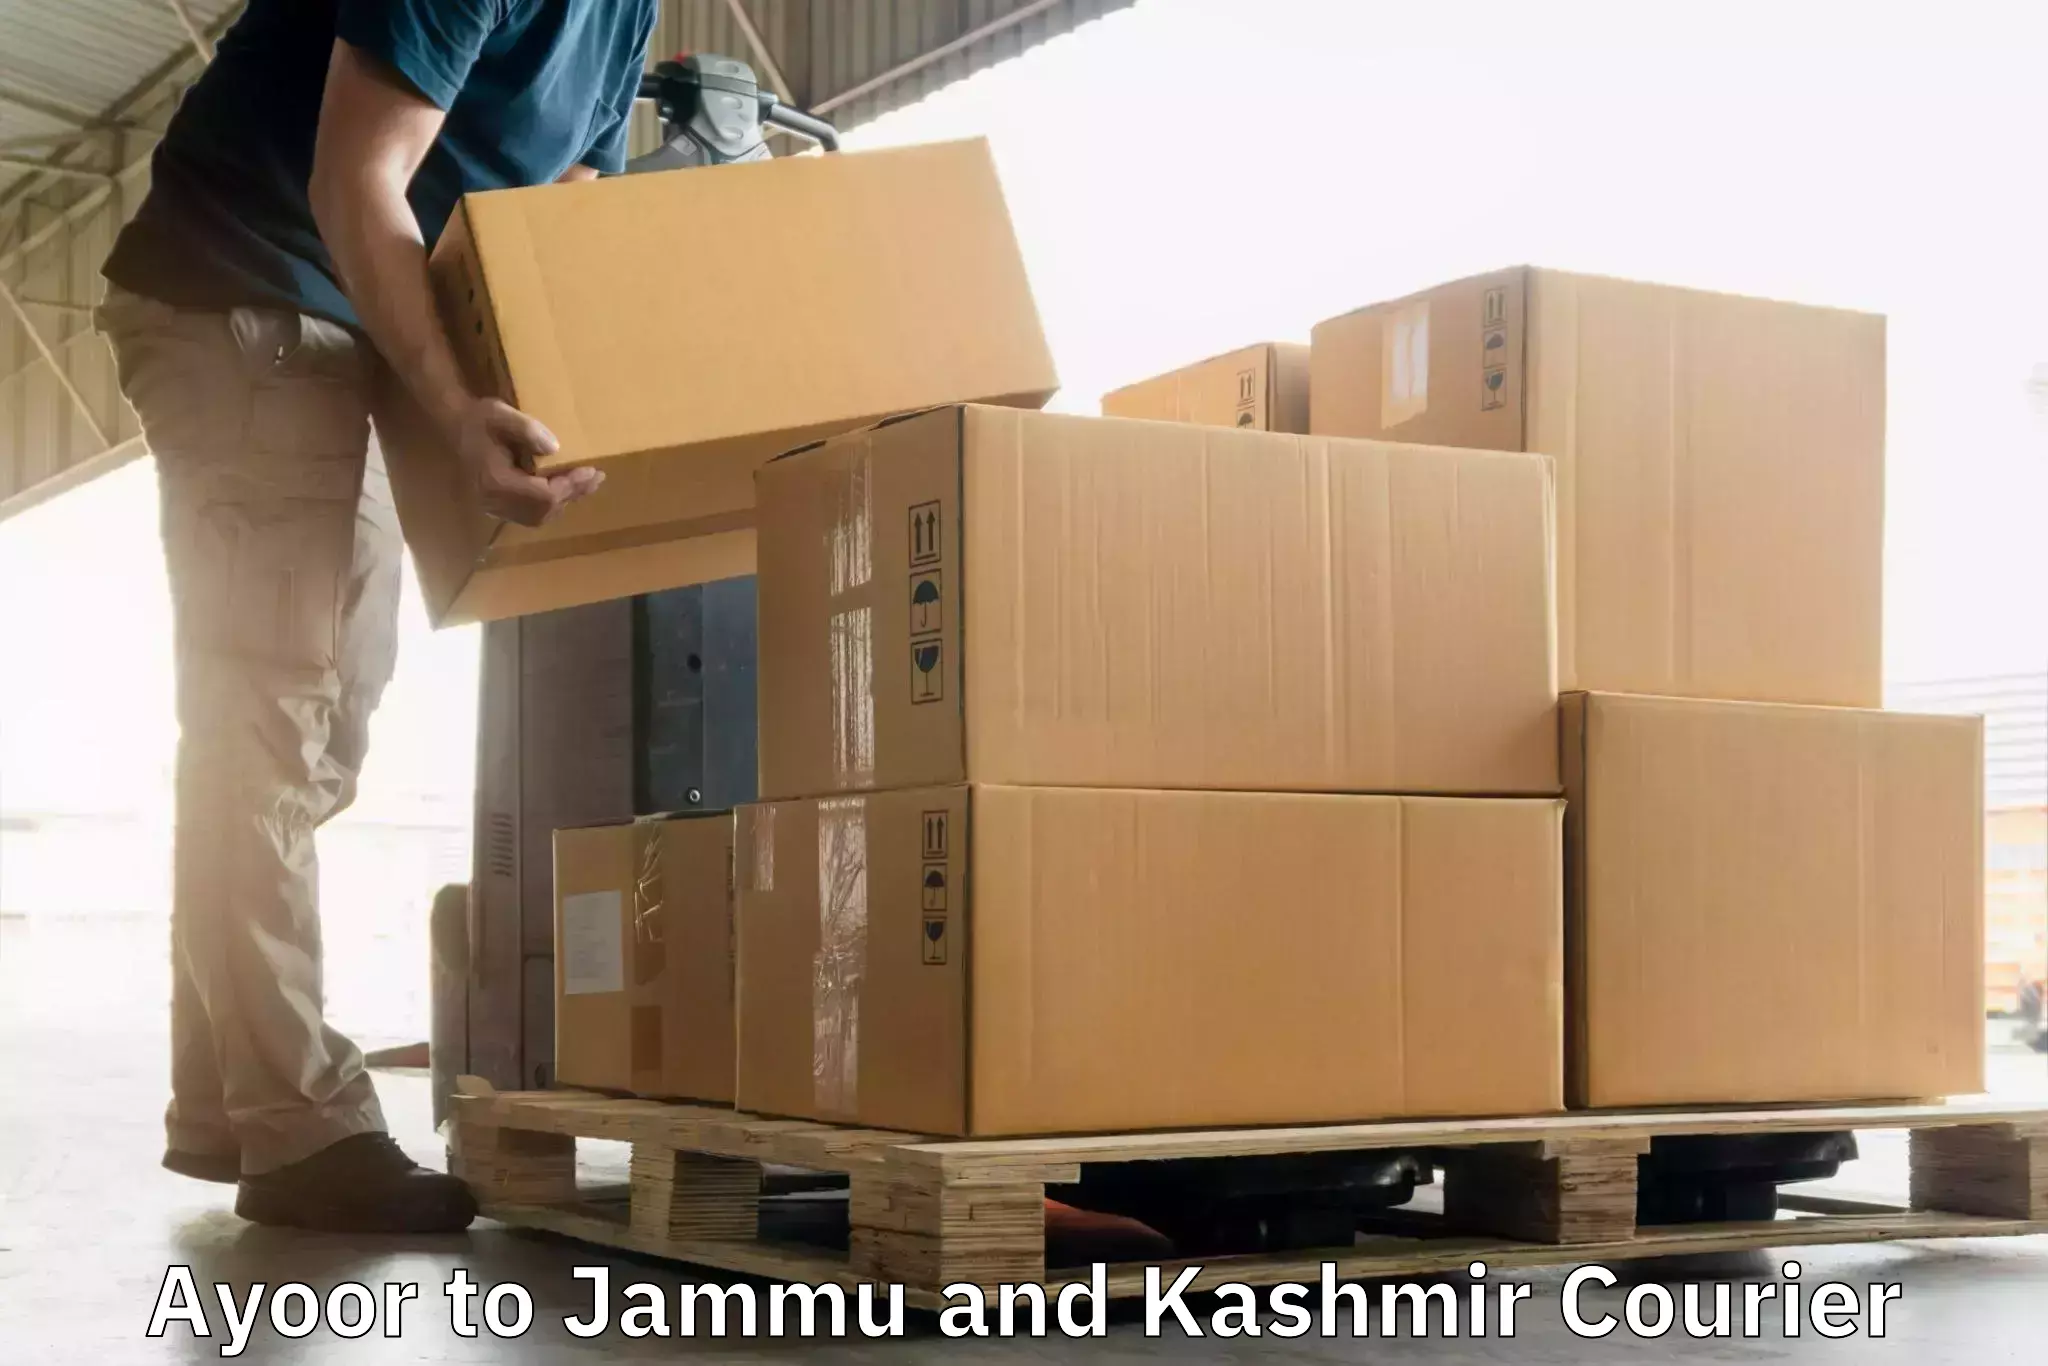 Efficient parcel tracking in Ayoor to Sunderbani